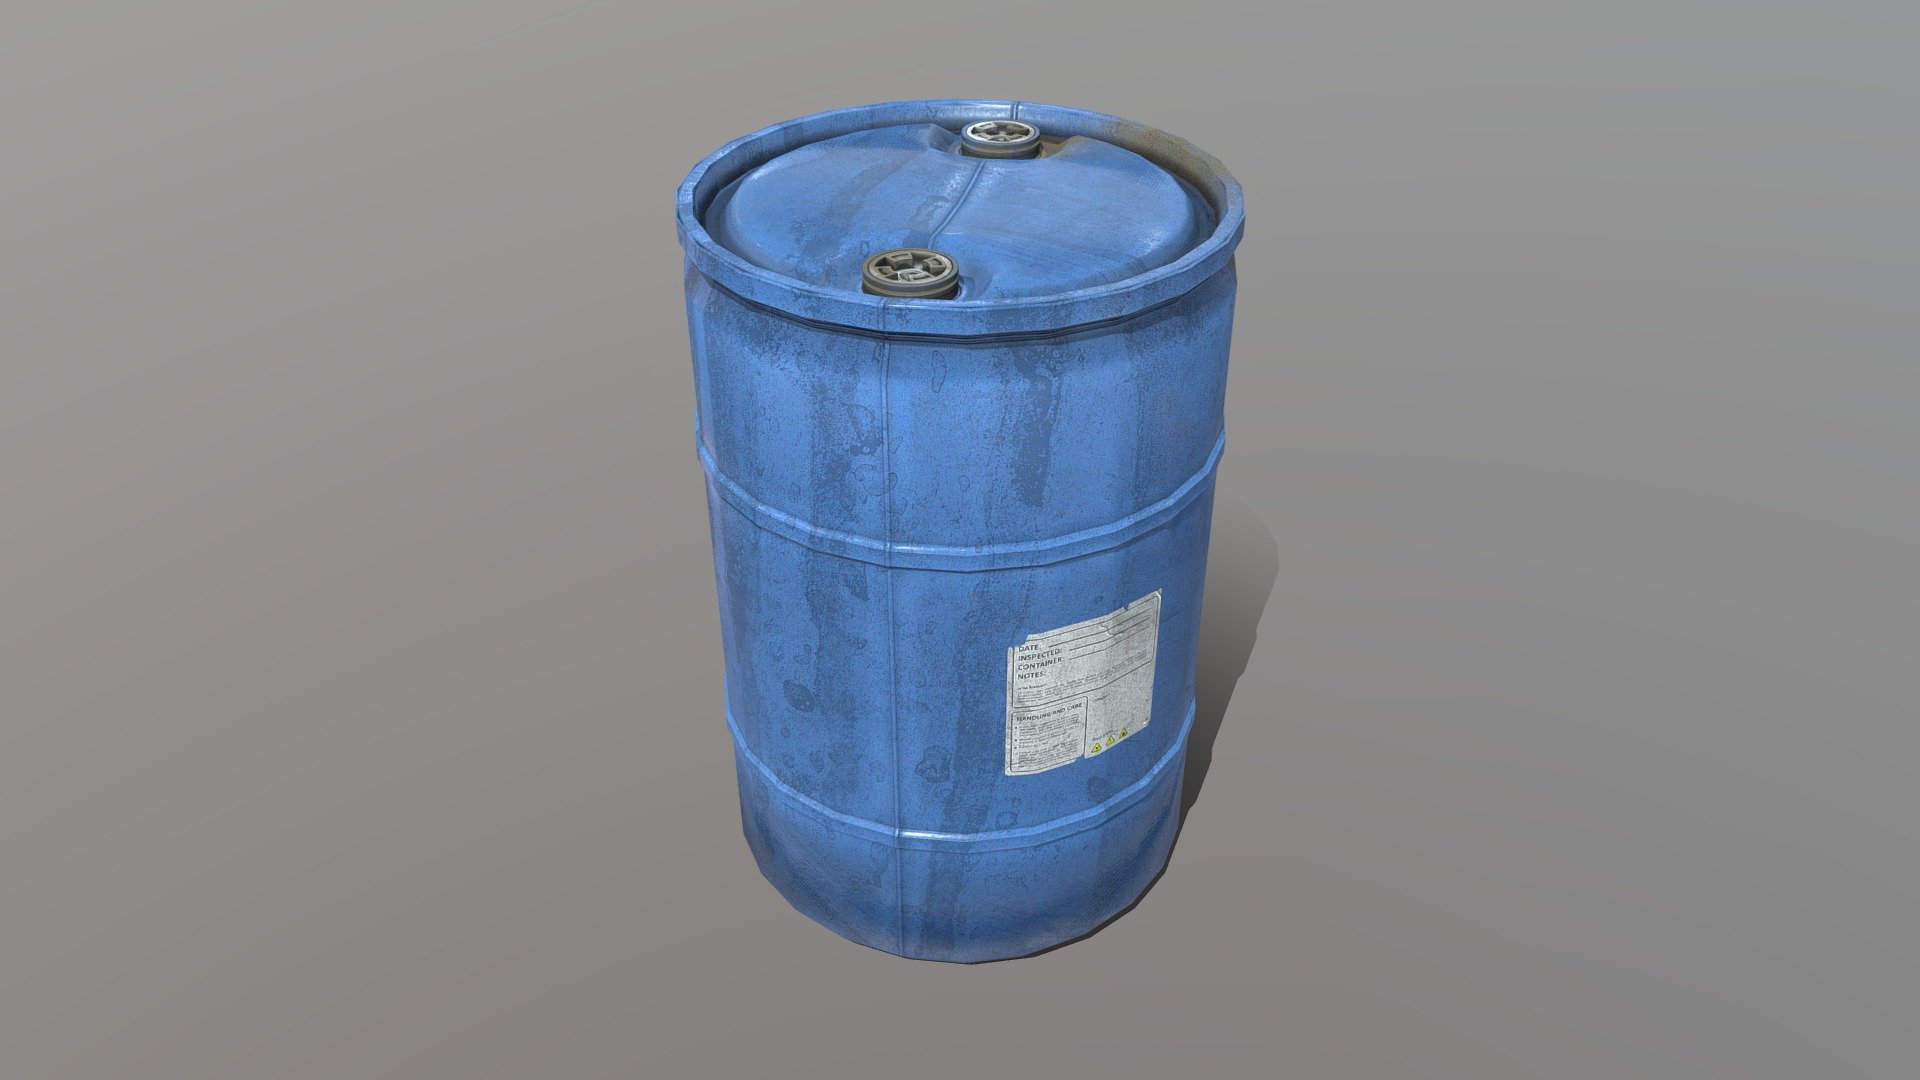 Created in Blender. Textured with Substance Painter. Made for GameGuru - Plastic Blue Drum - 3D model by UltraMelon 3d model